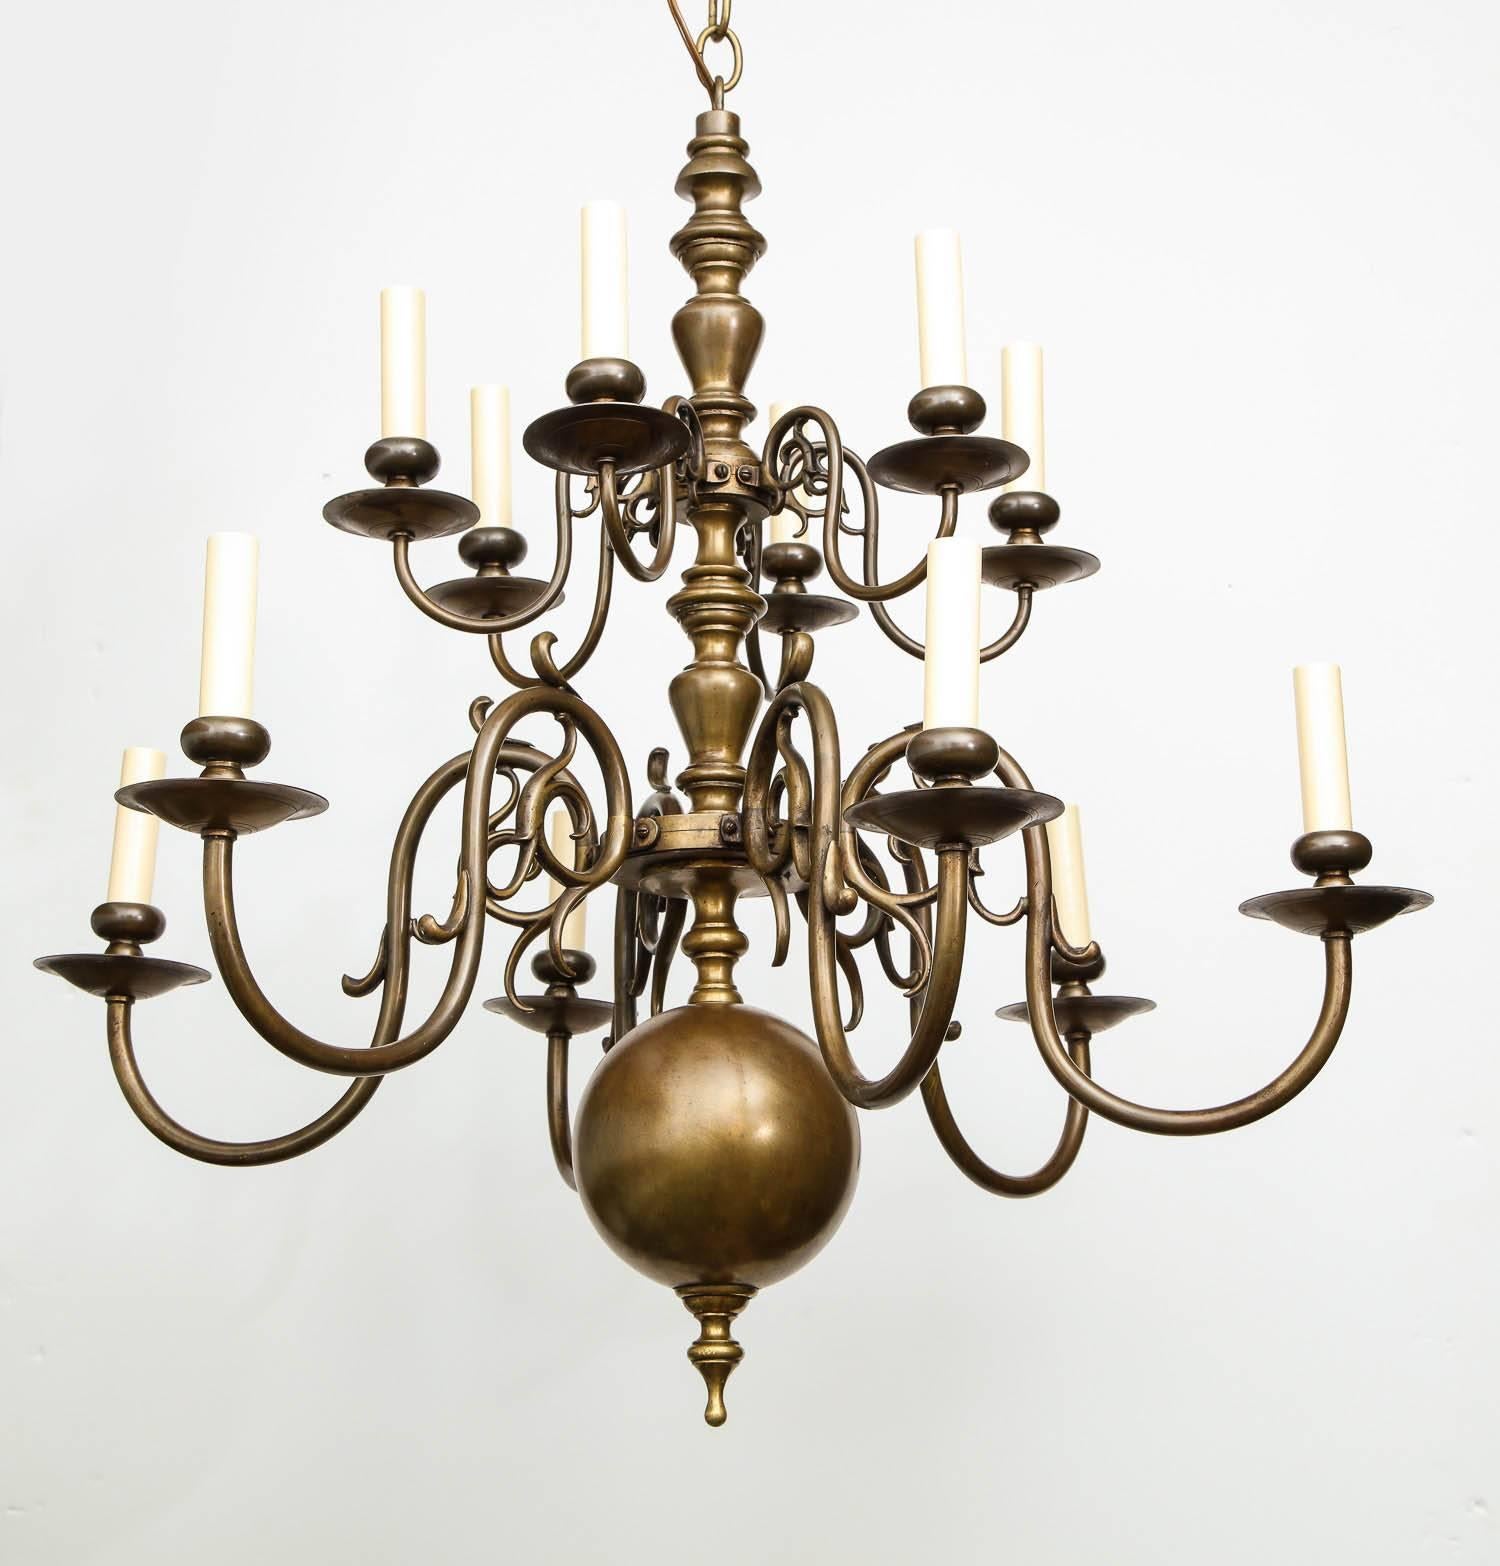 Fine turn of the century brass chandelier having two tiers of lights, both having six scrolled arms, the center shaft with balustrade turnings and ball finial, the whole with good bronze like surface and recently re-electrified.